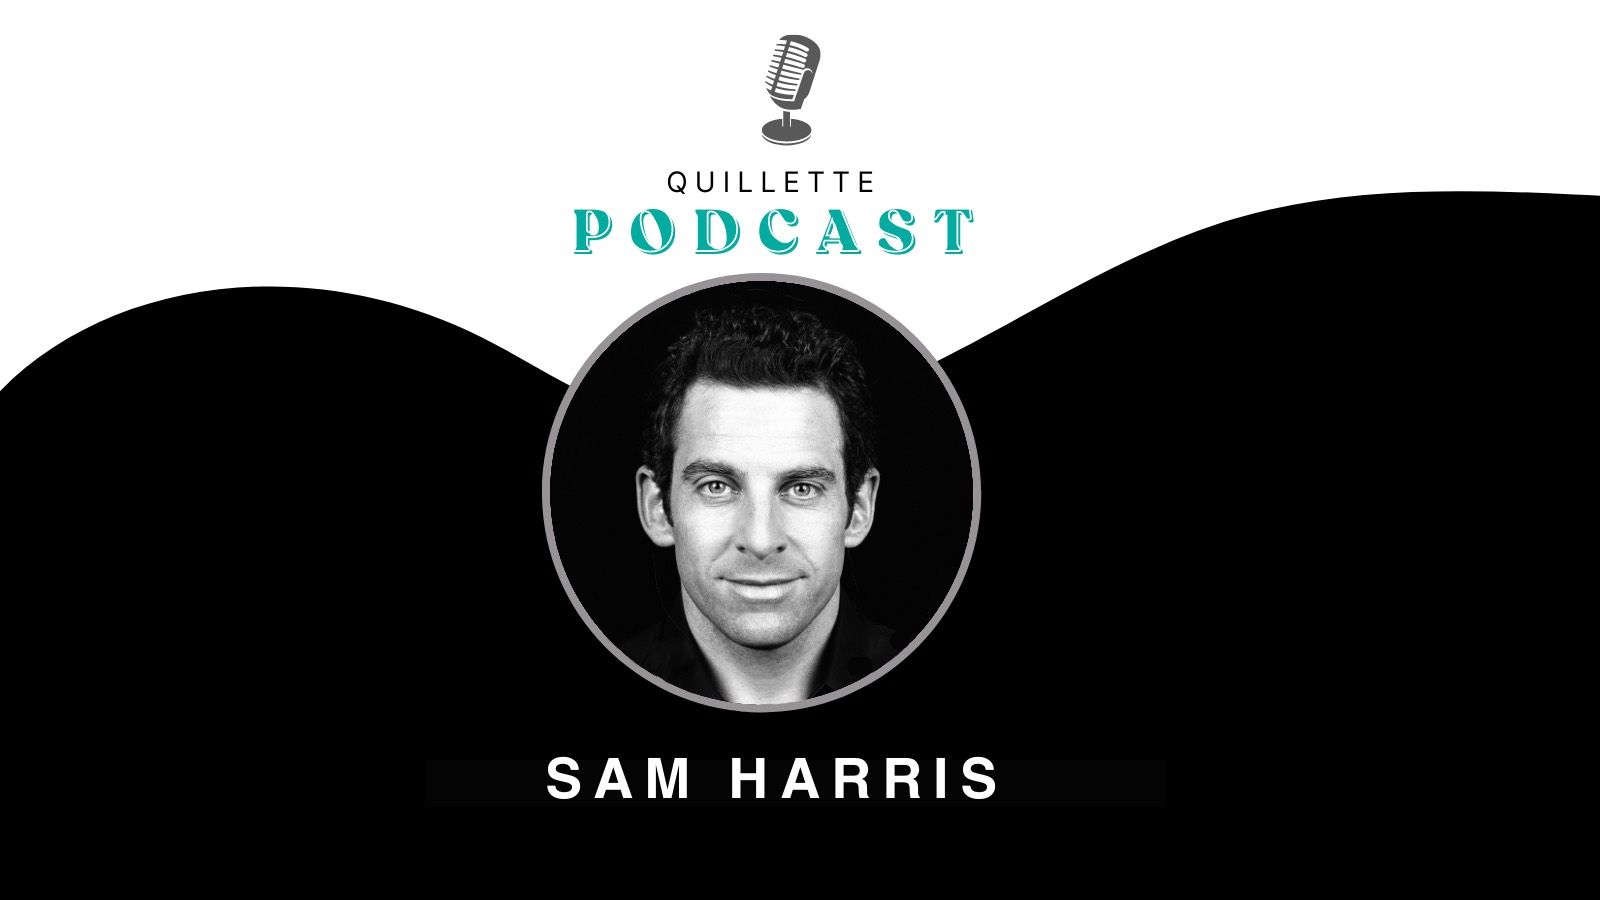 Quillette Podcast #184: Sam Harris on Islam, Joe Rogan, Vaccines, Meditation, Ricky Gervais, and the Myth of Free Will